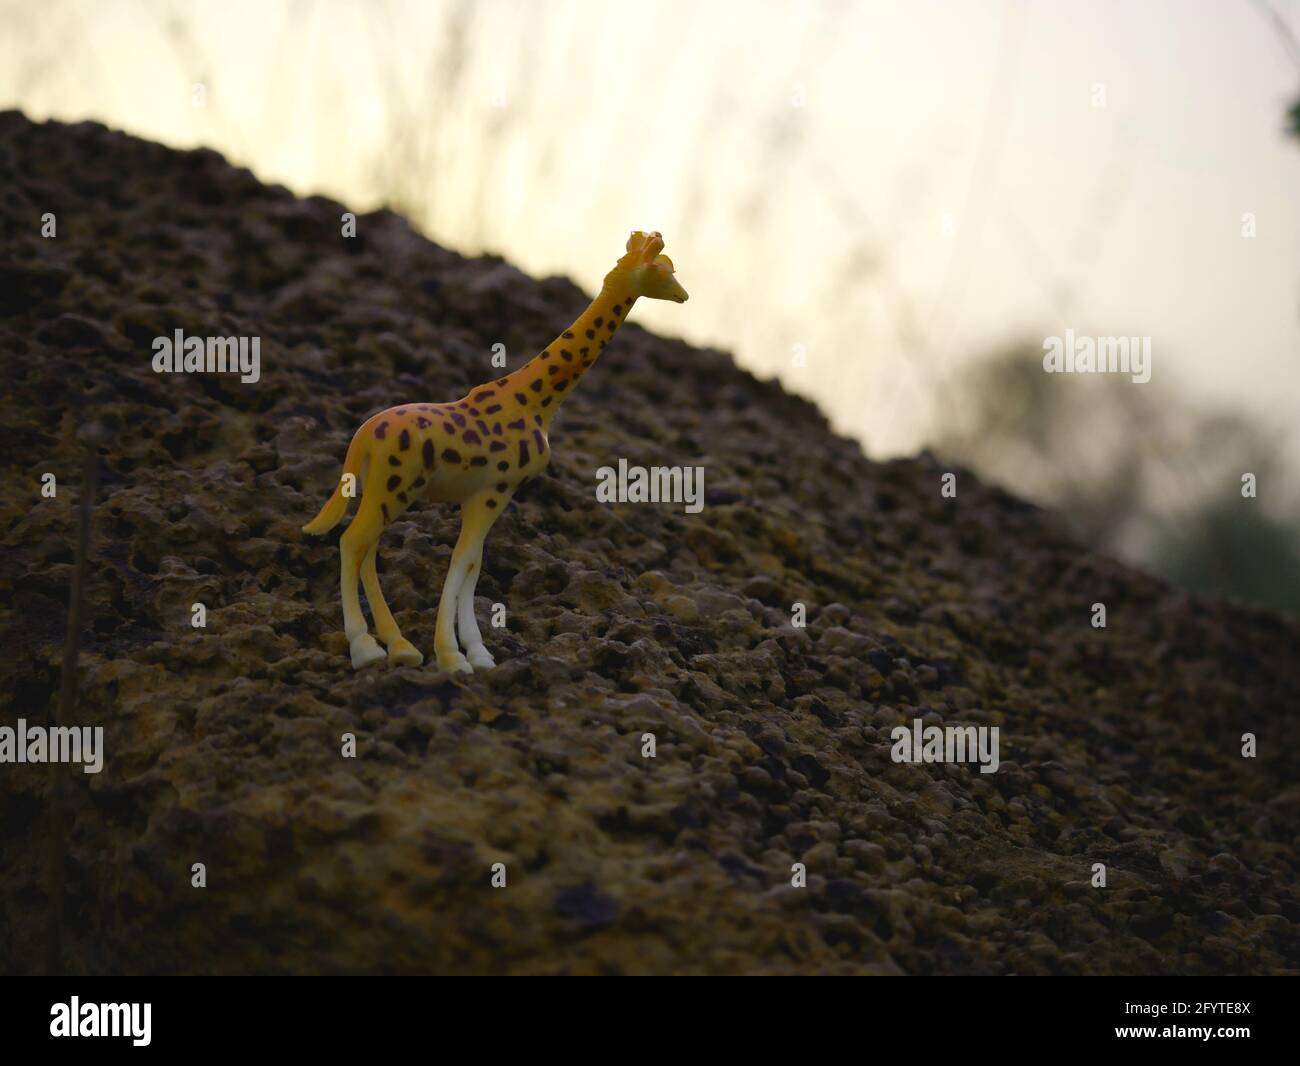 giraffe animal toy isolated around stone rock at forest blur background Stock Photo